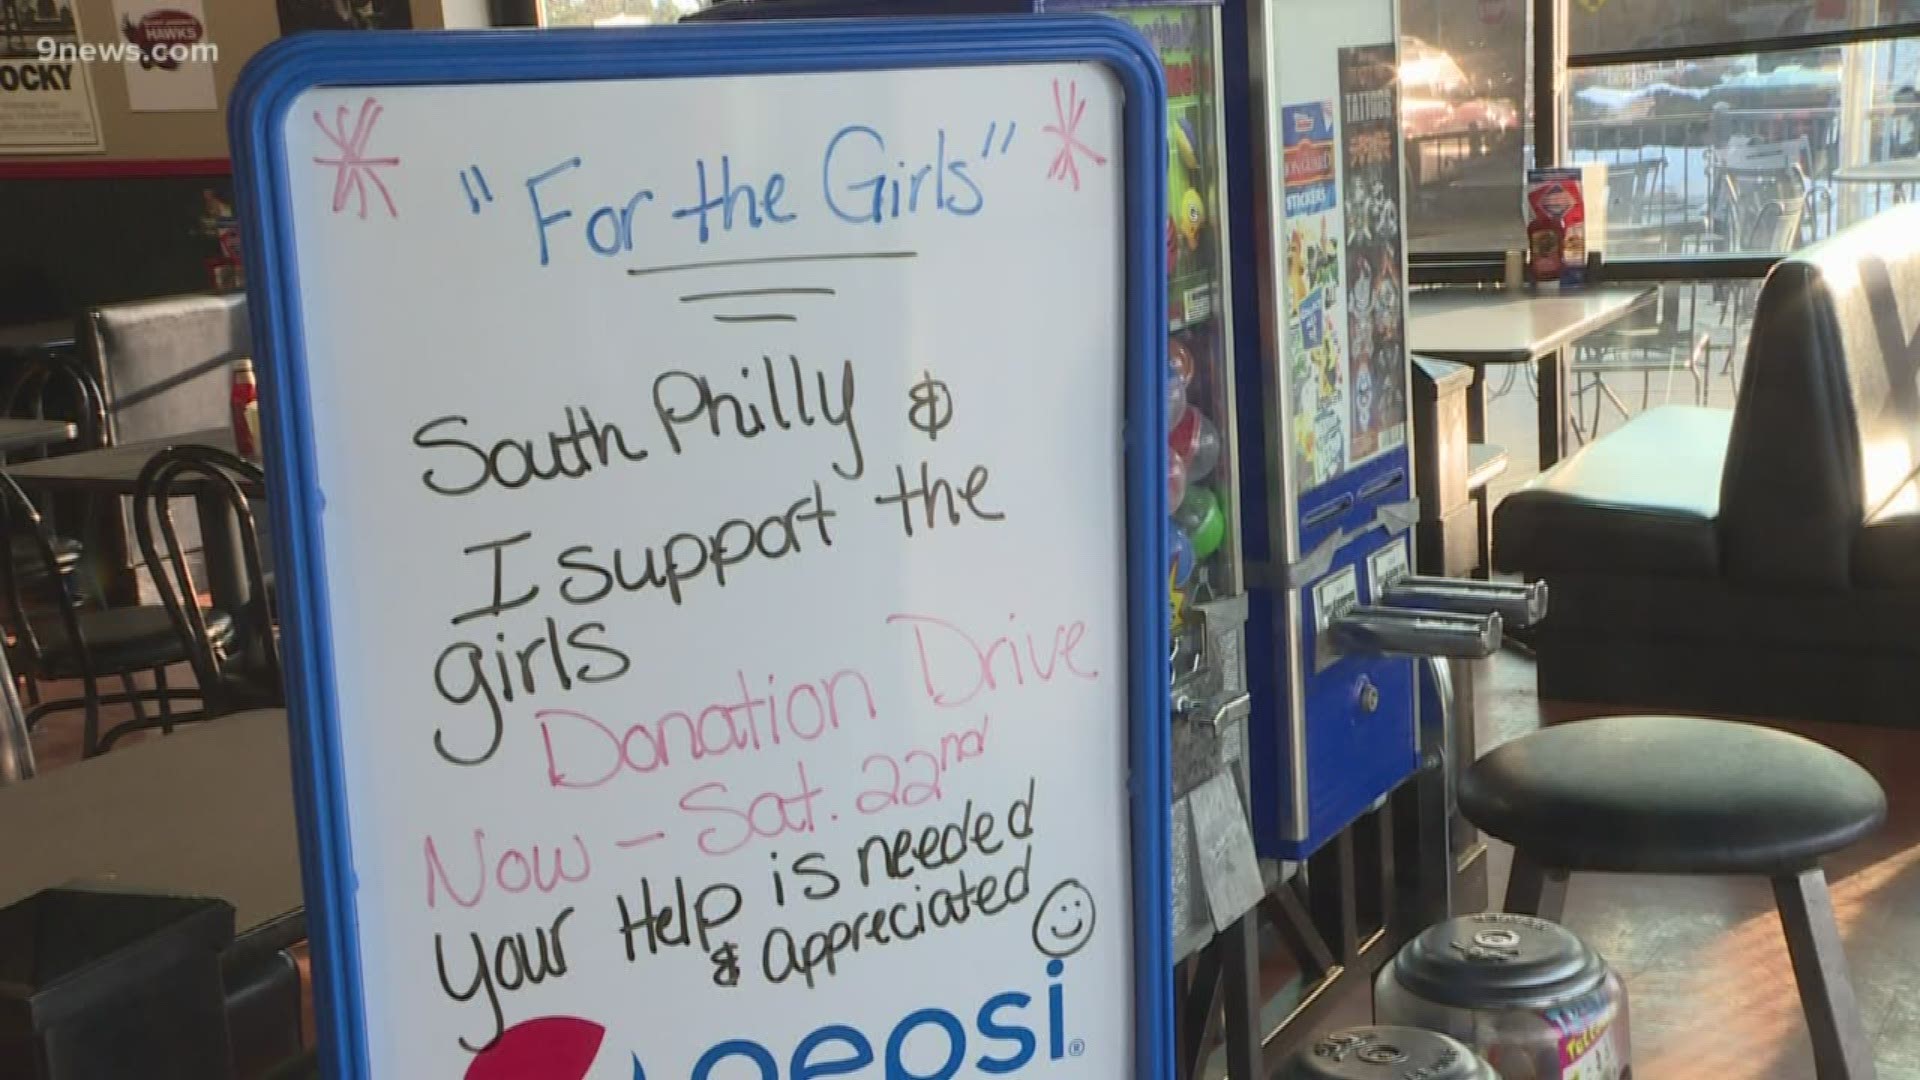 Donations can be dropped off at one of four South Philly Cheese Steaks locations in metro Denver.